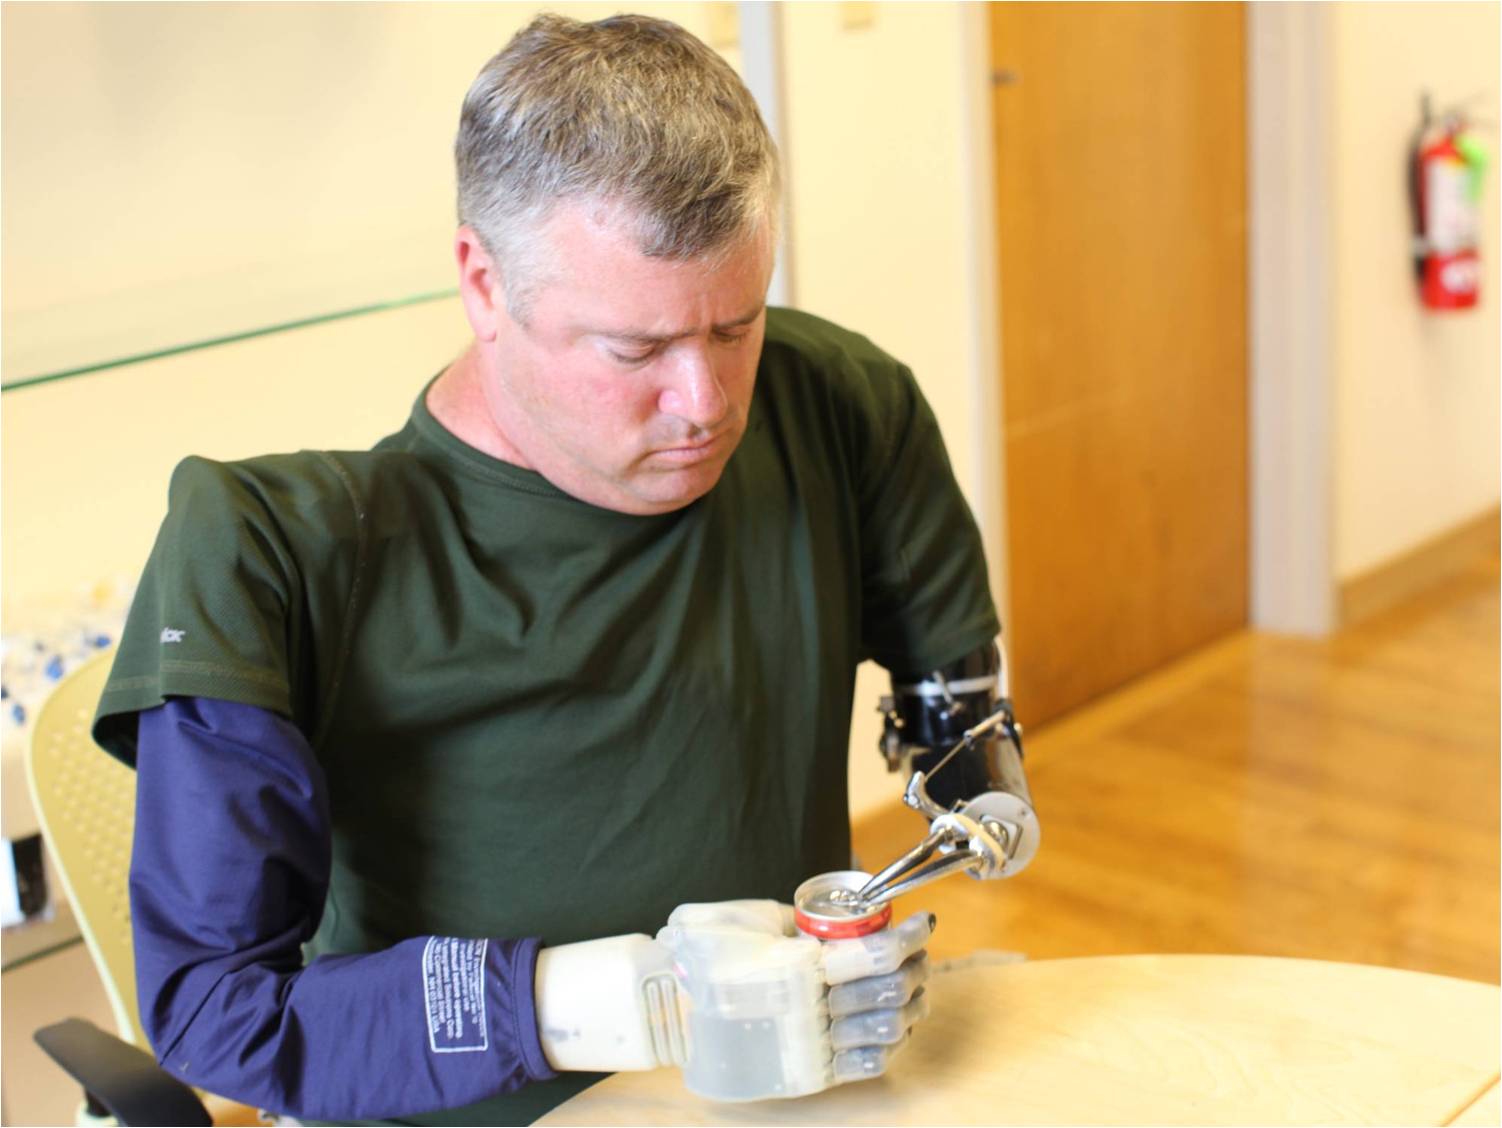 Paralyzed Man Becomes First To ‘Feel’ With Sophisticated Hand Prosthetic